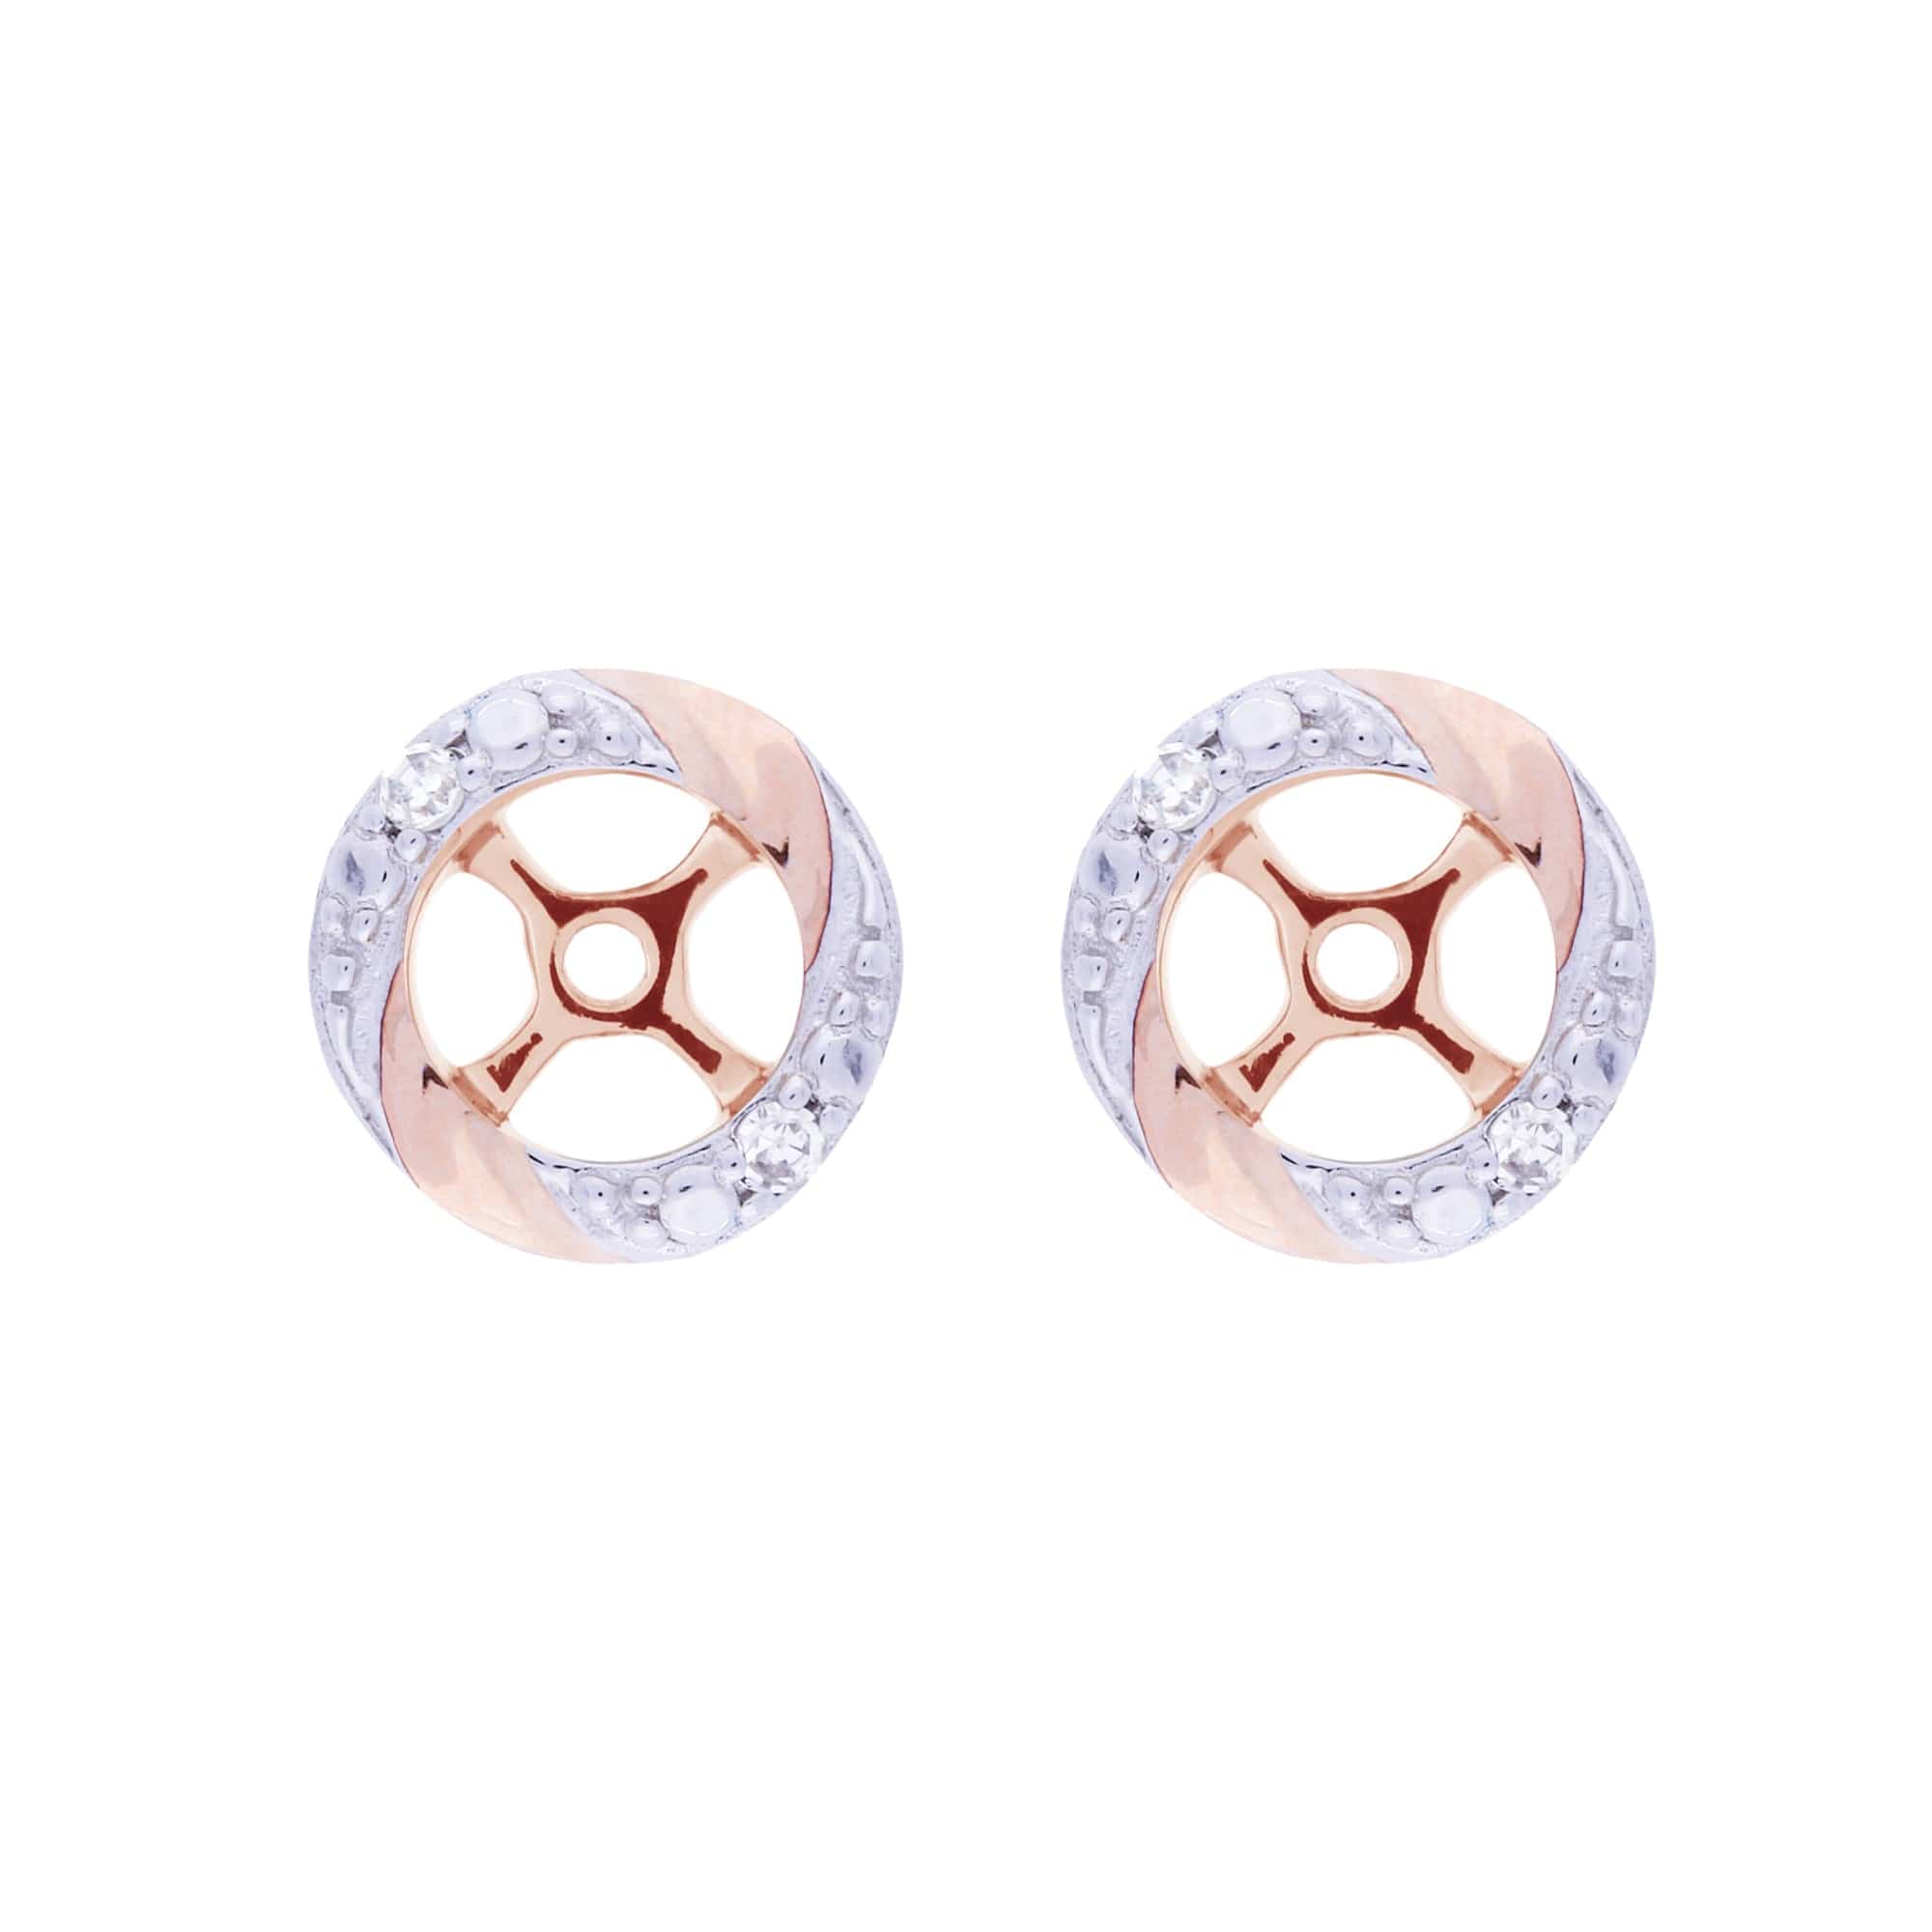 Classic Round Diamond Earring Jacket in Two Tone Rose & Rhodium Plated 9ct Gold - Gemondo